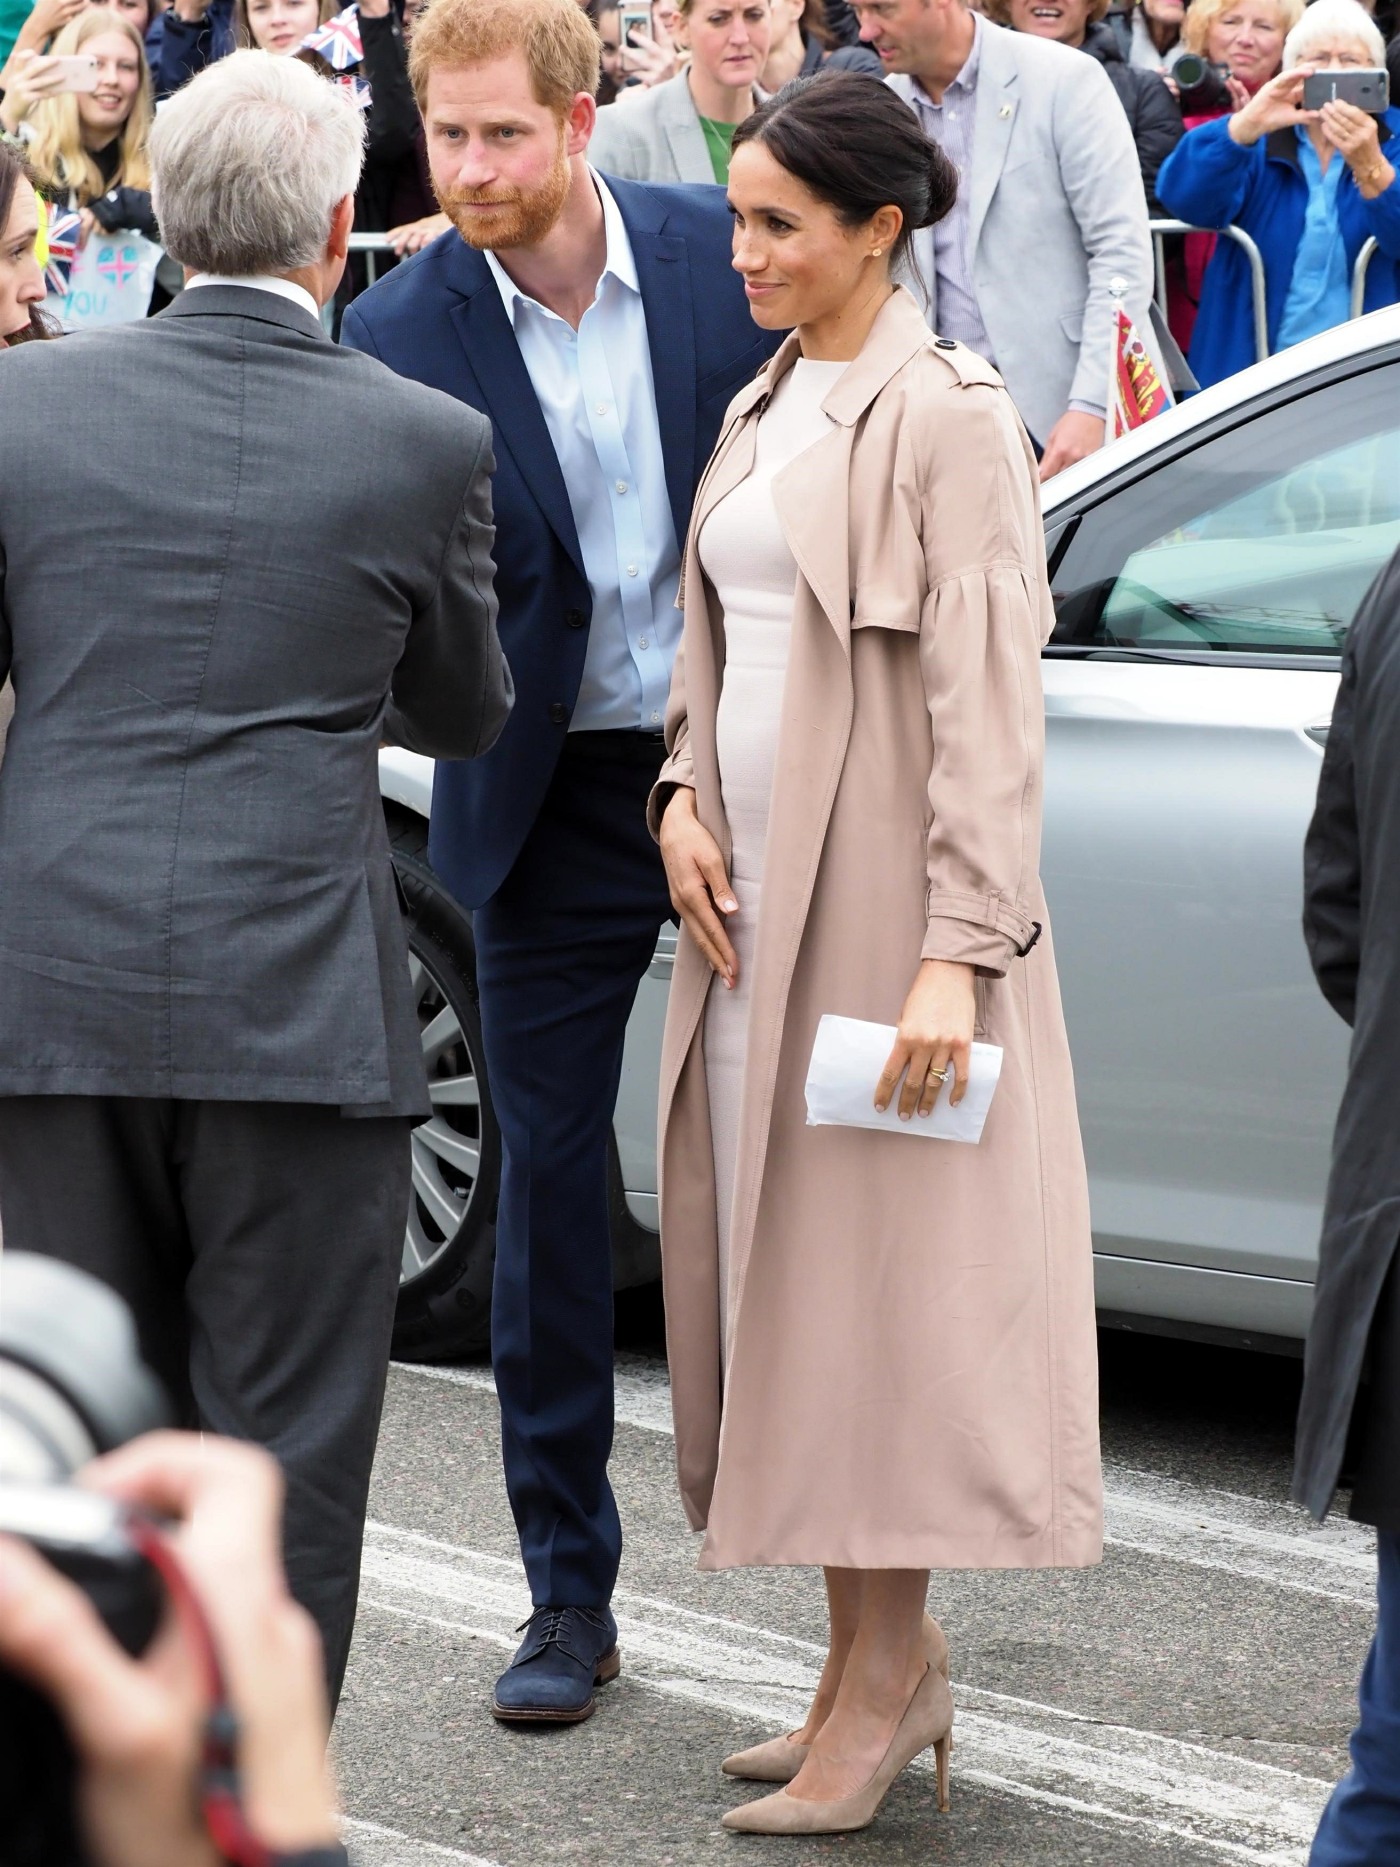 The Duke of Sussex and Duchess of Sussex greet crowds of well wishers at Viaduct Harbour in New Zealand